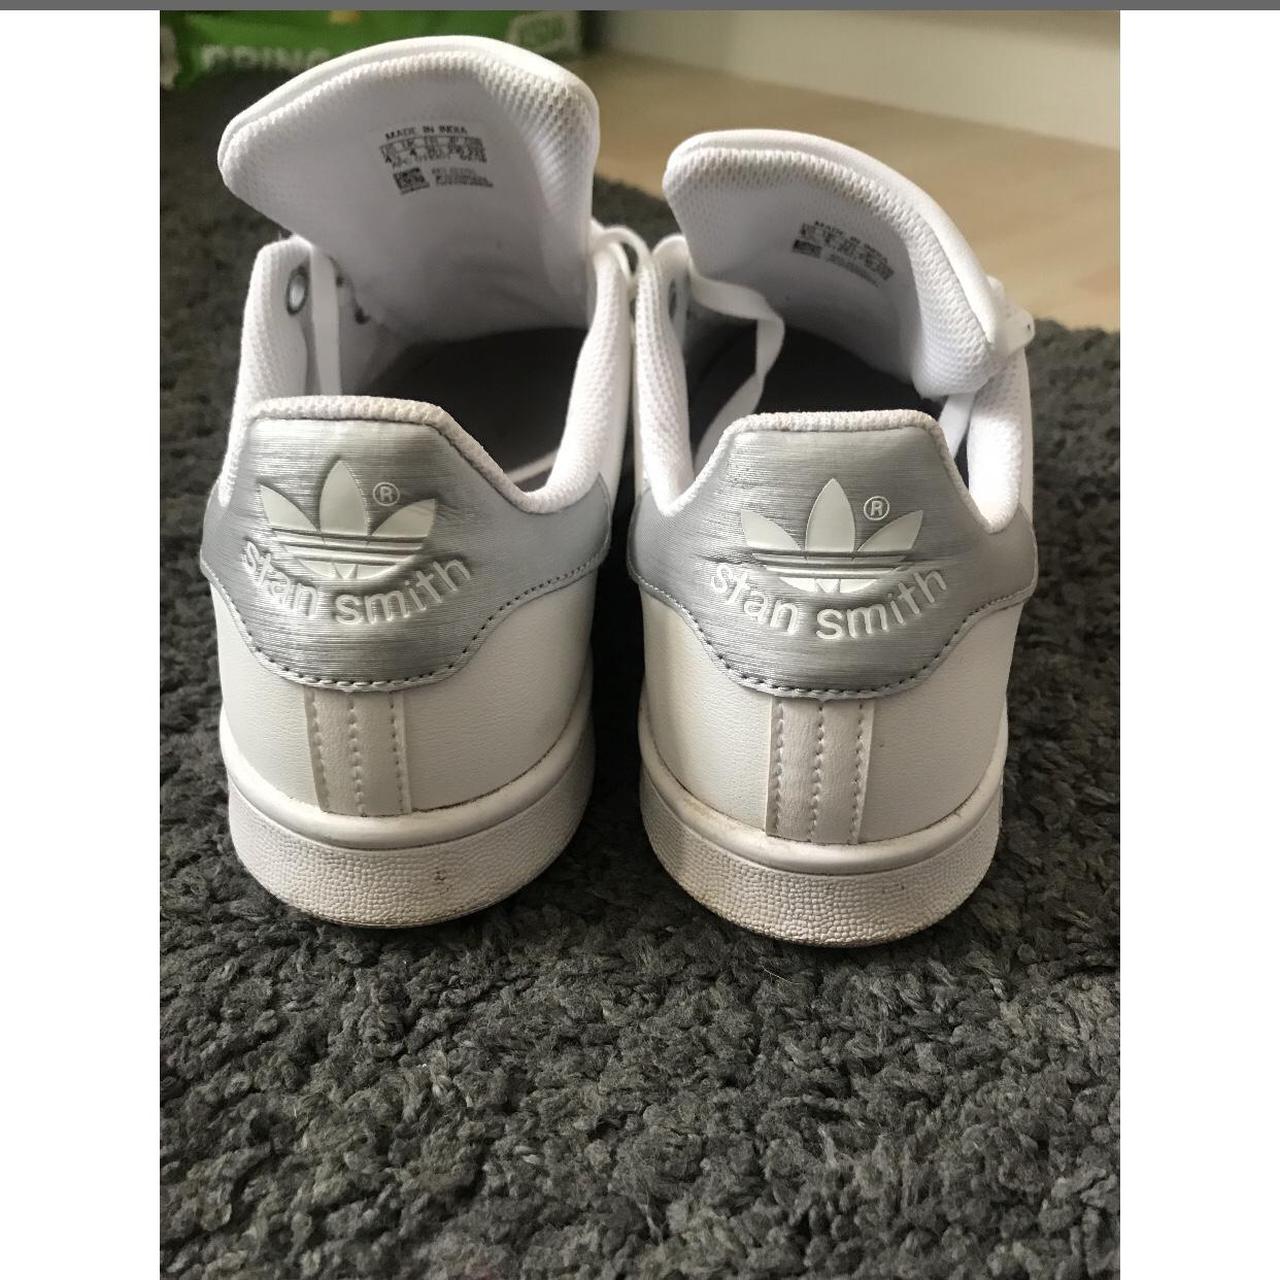 Product Image 1 - Adidas Stan smith trainers Size